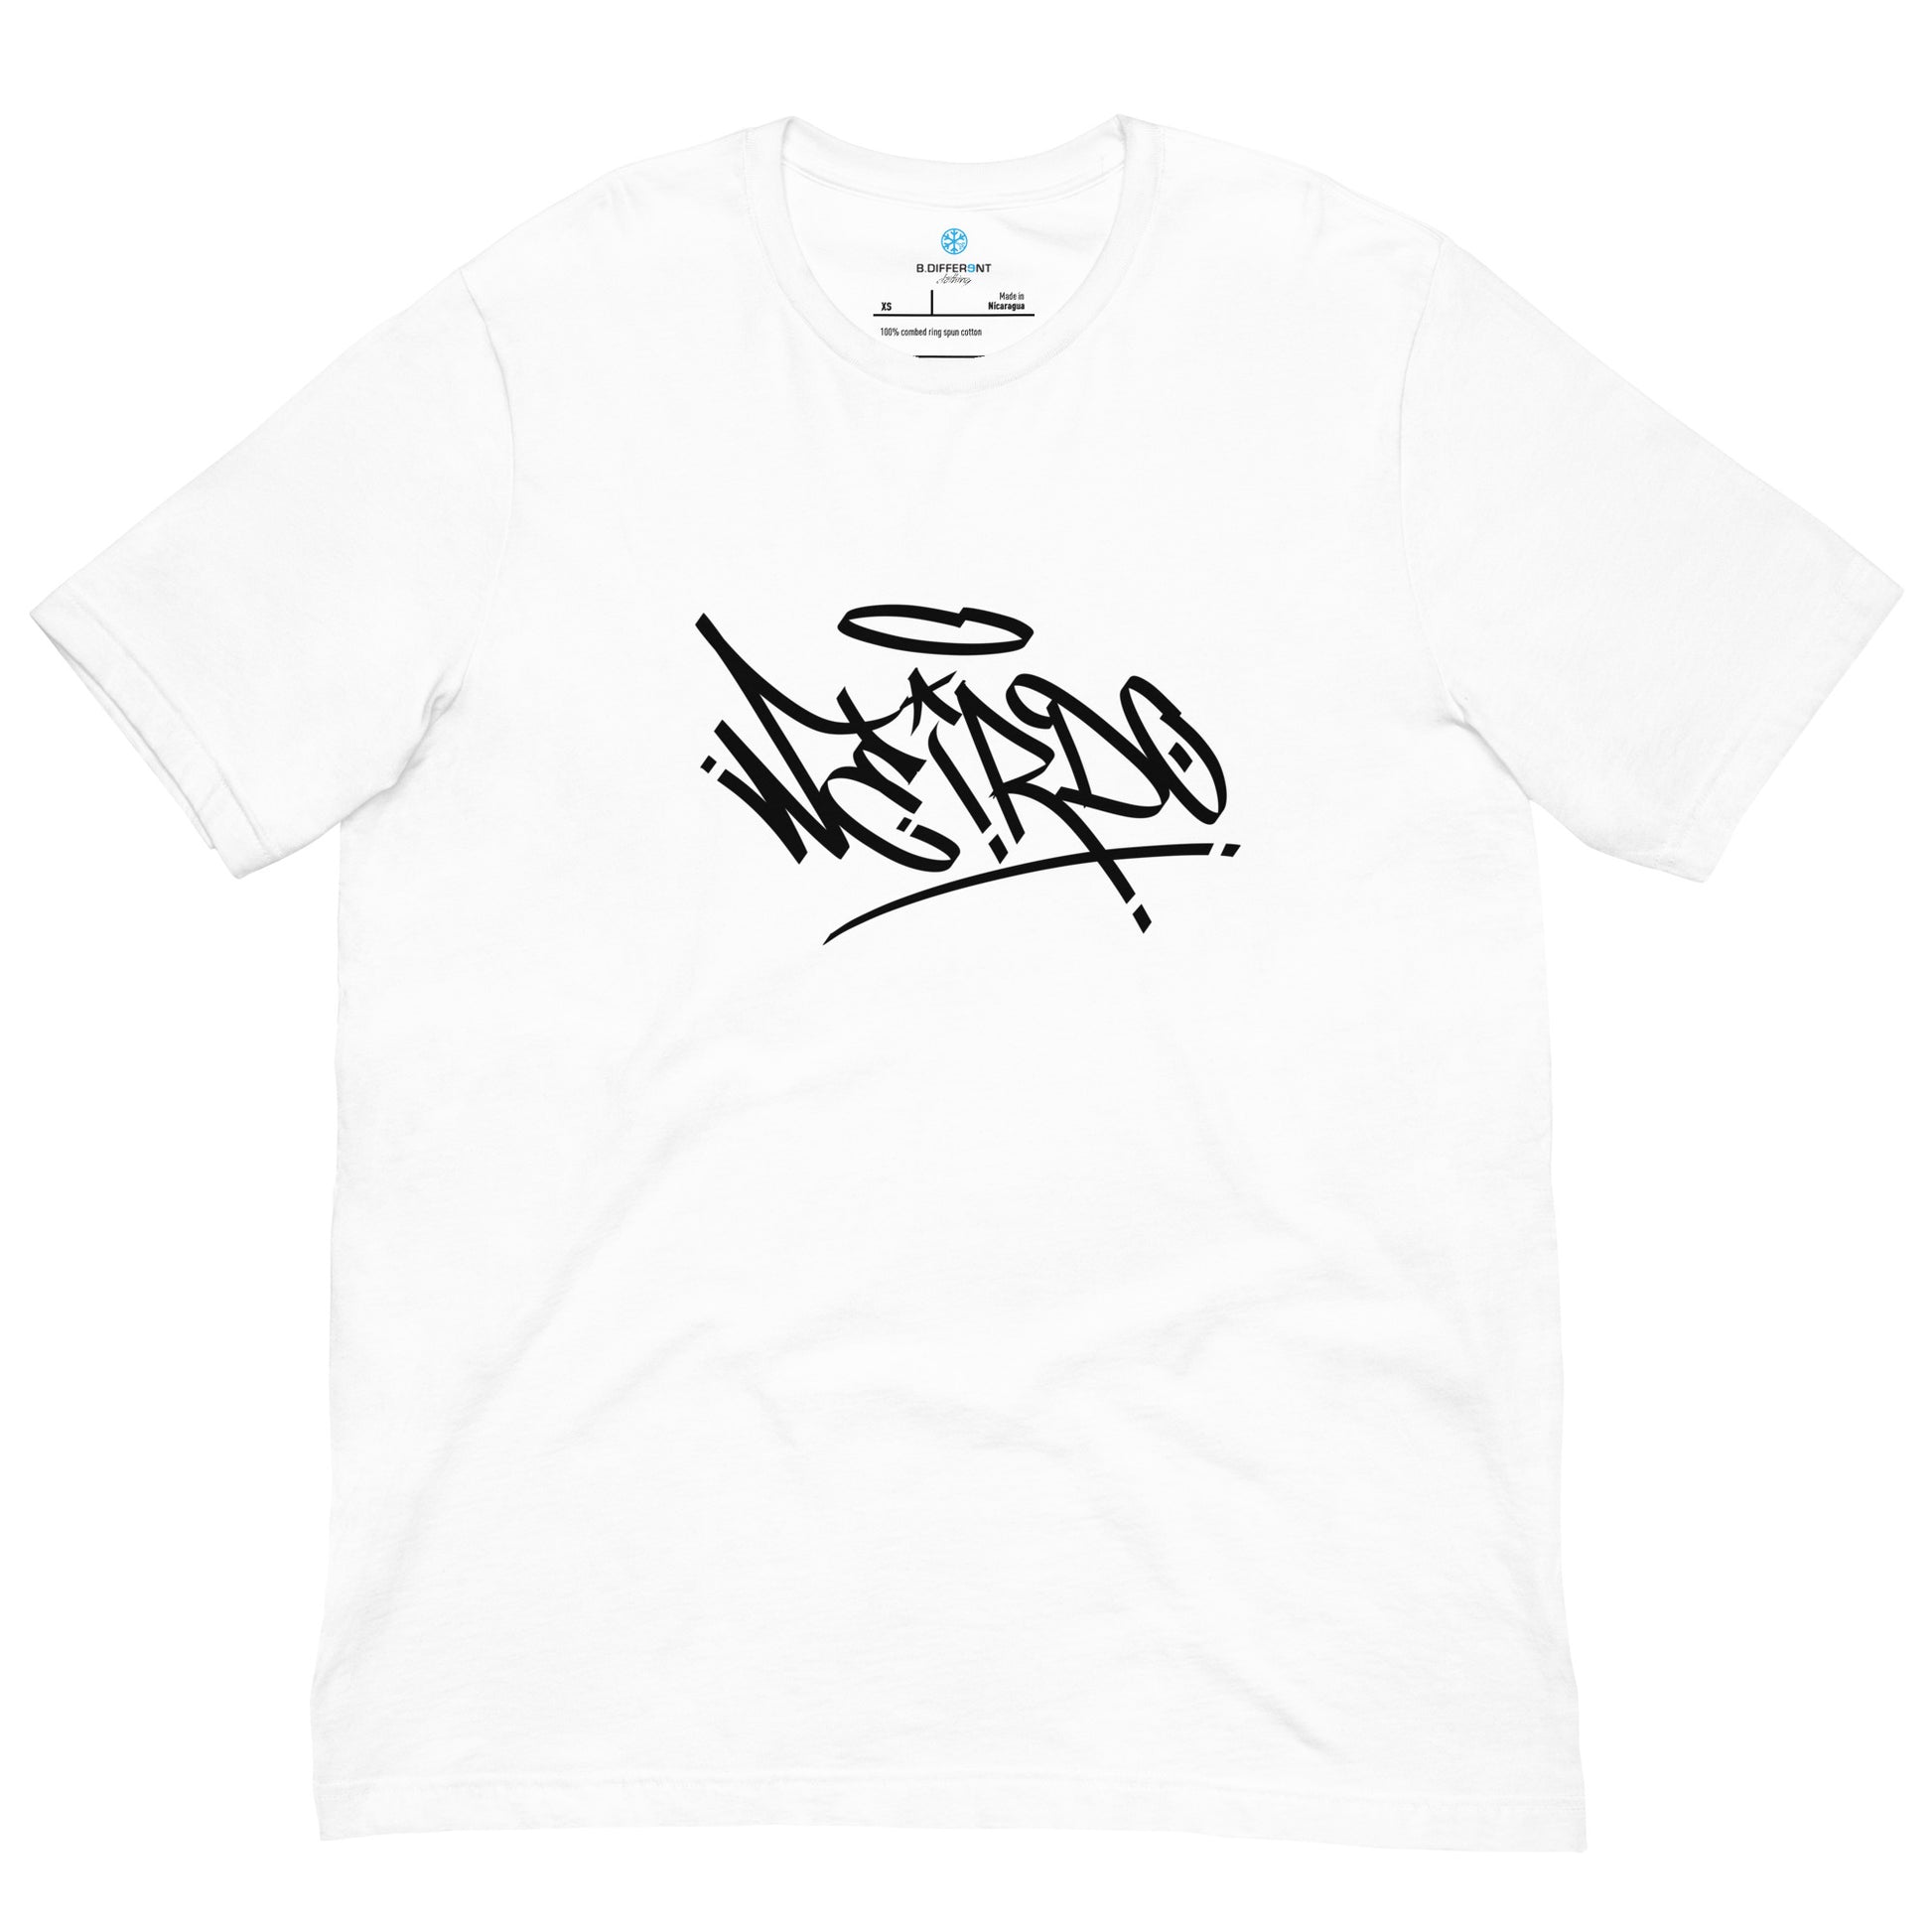 Weirdo Tag Tee white by B.Different Clothing street art graffiti inspired brand for weirdos, outsiders, and misfits.